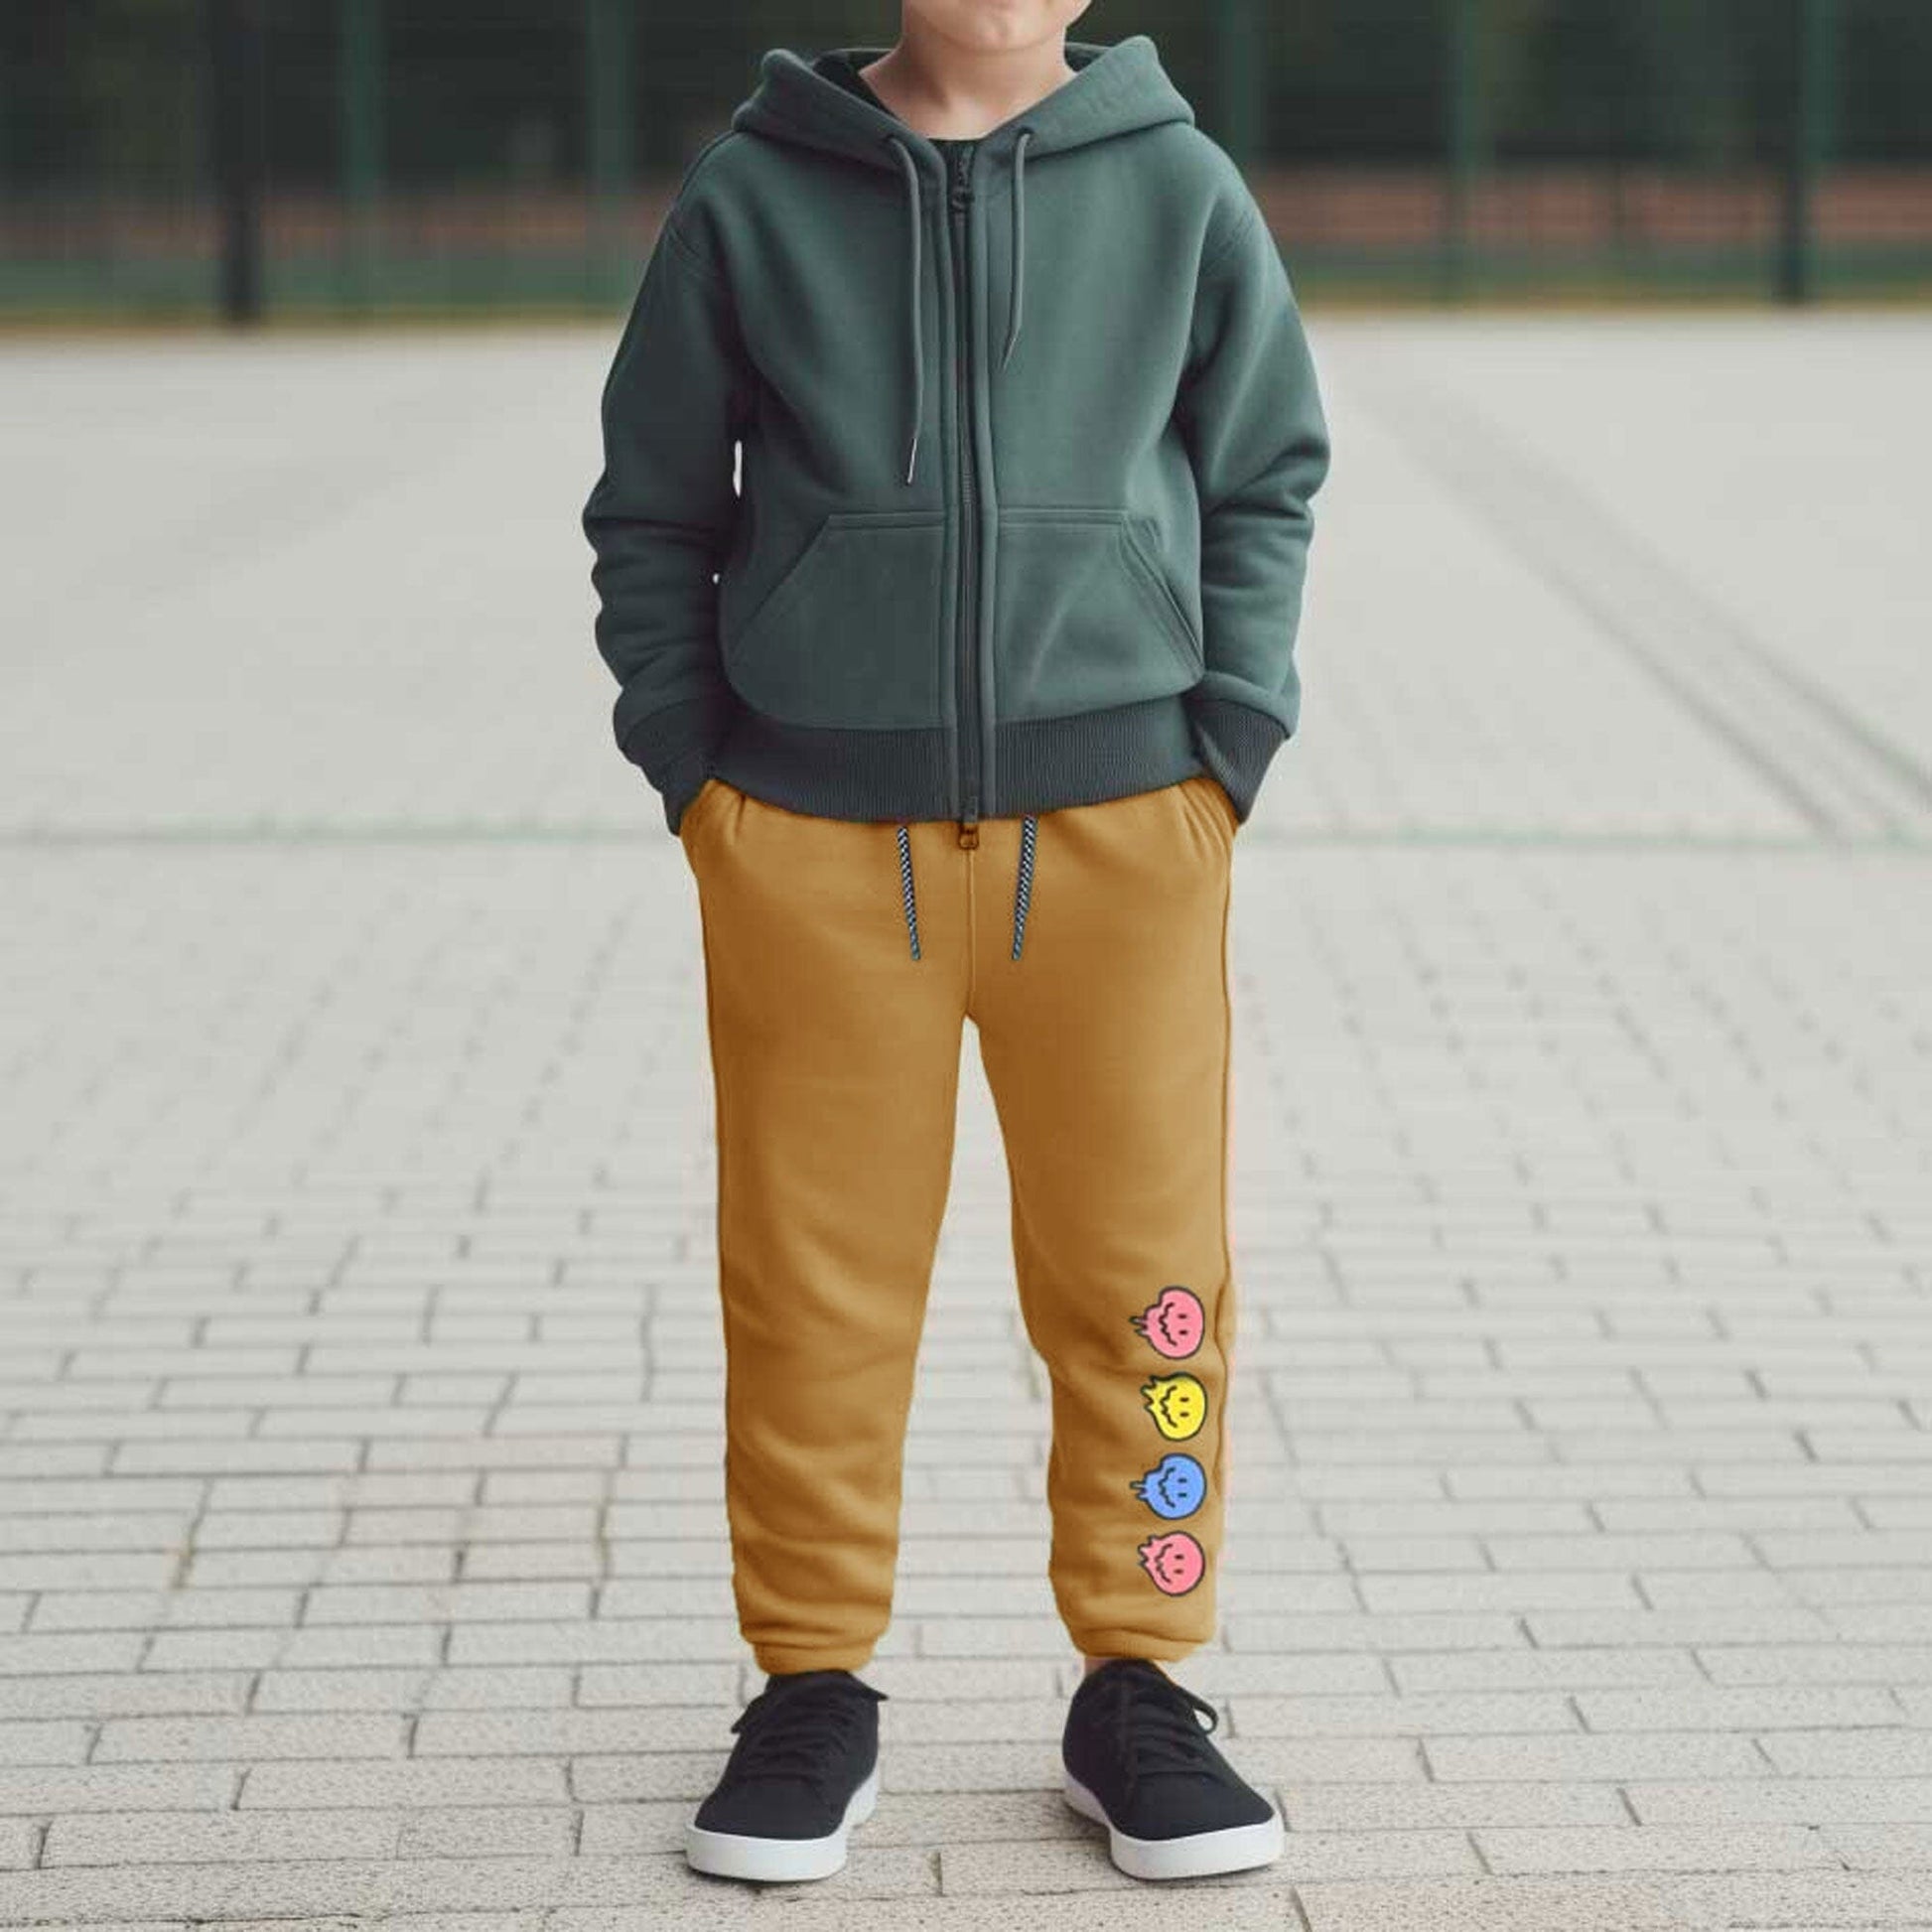 Max 21 Kid's Printed Design Fleece Trousers Boy's Trousers SZK Mustard 3-4 Years 